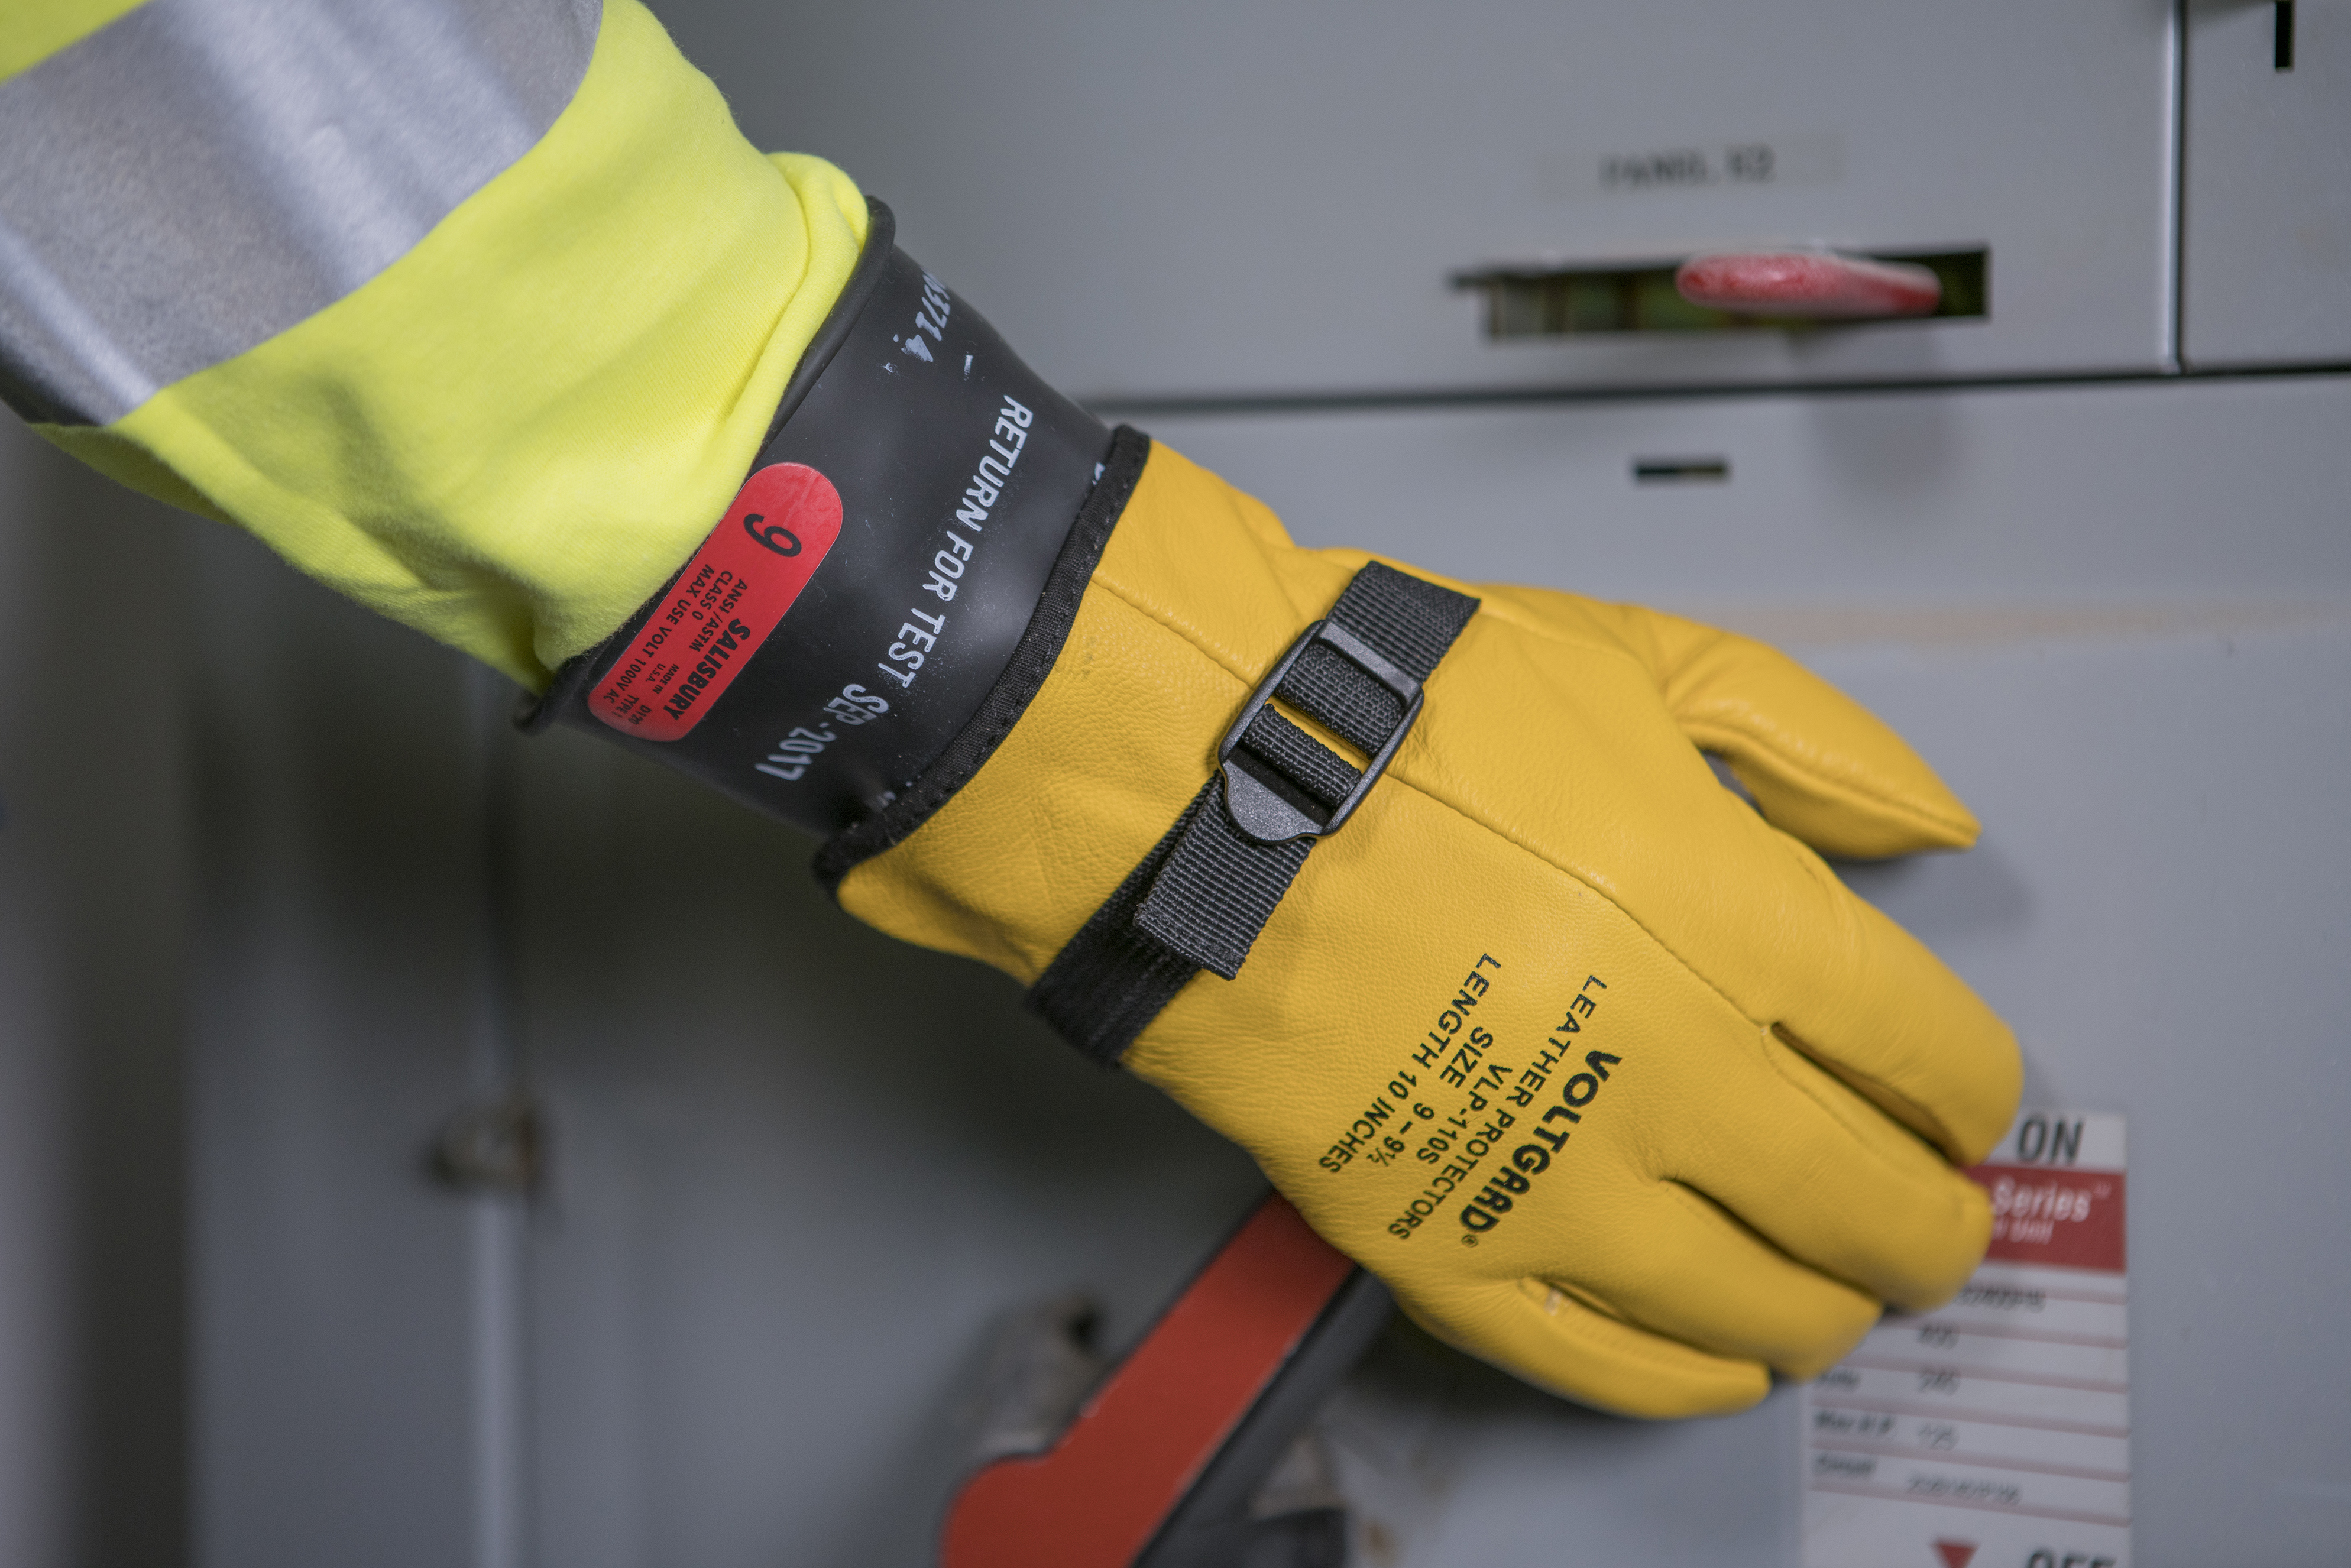 Electrician gloves: A protective equipment to prevent electrical